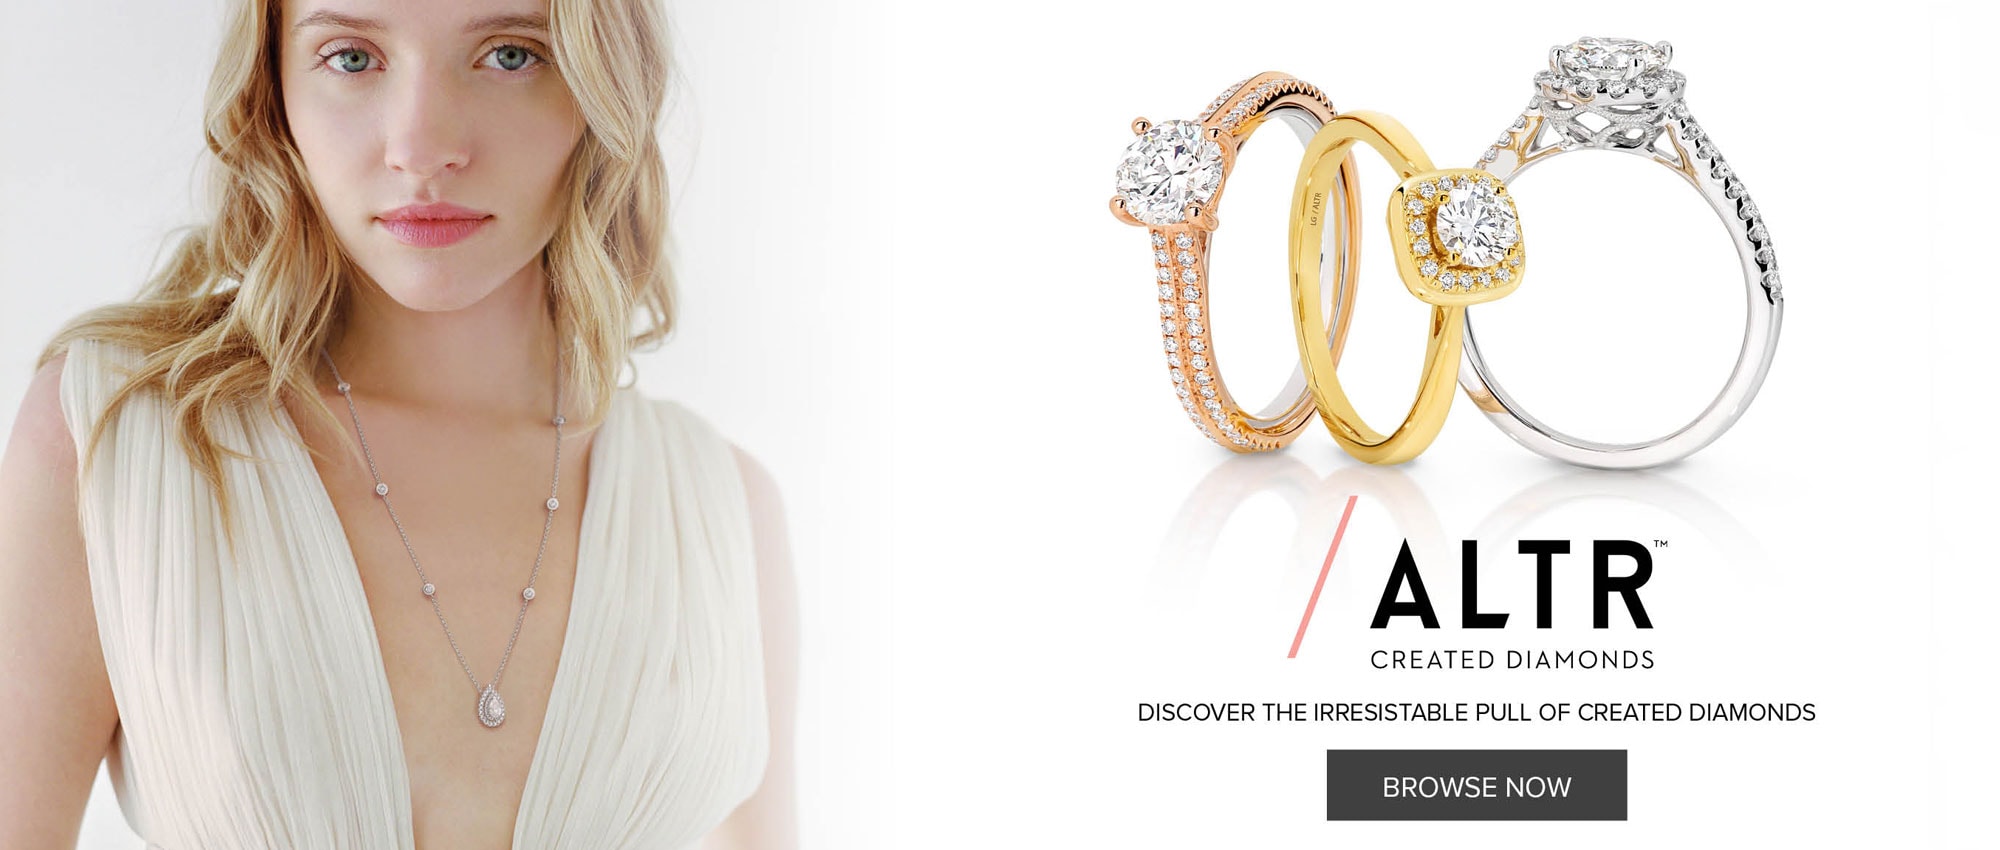 ALTR Diamonds Available At Stanthorpe Jewellers